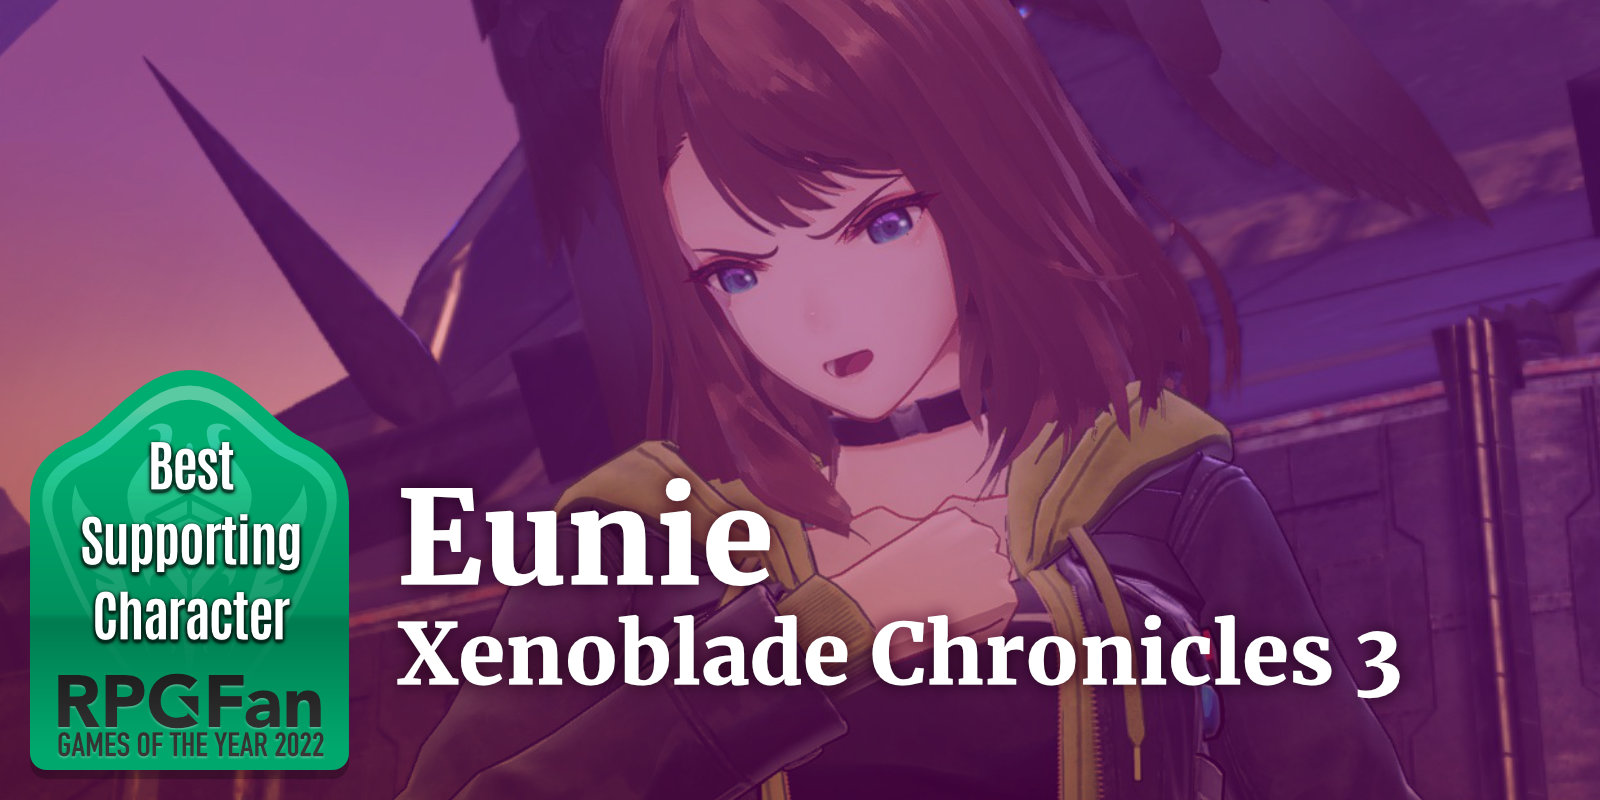 GOTY 2022 Best Supporting Character Eunie Xenoblade Chronicles 3